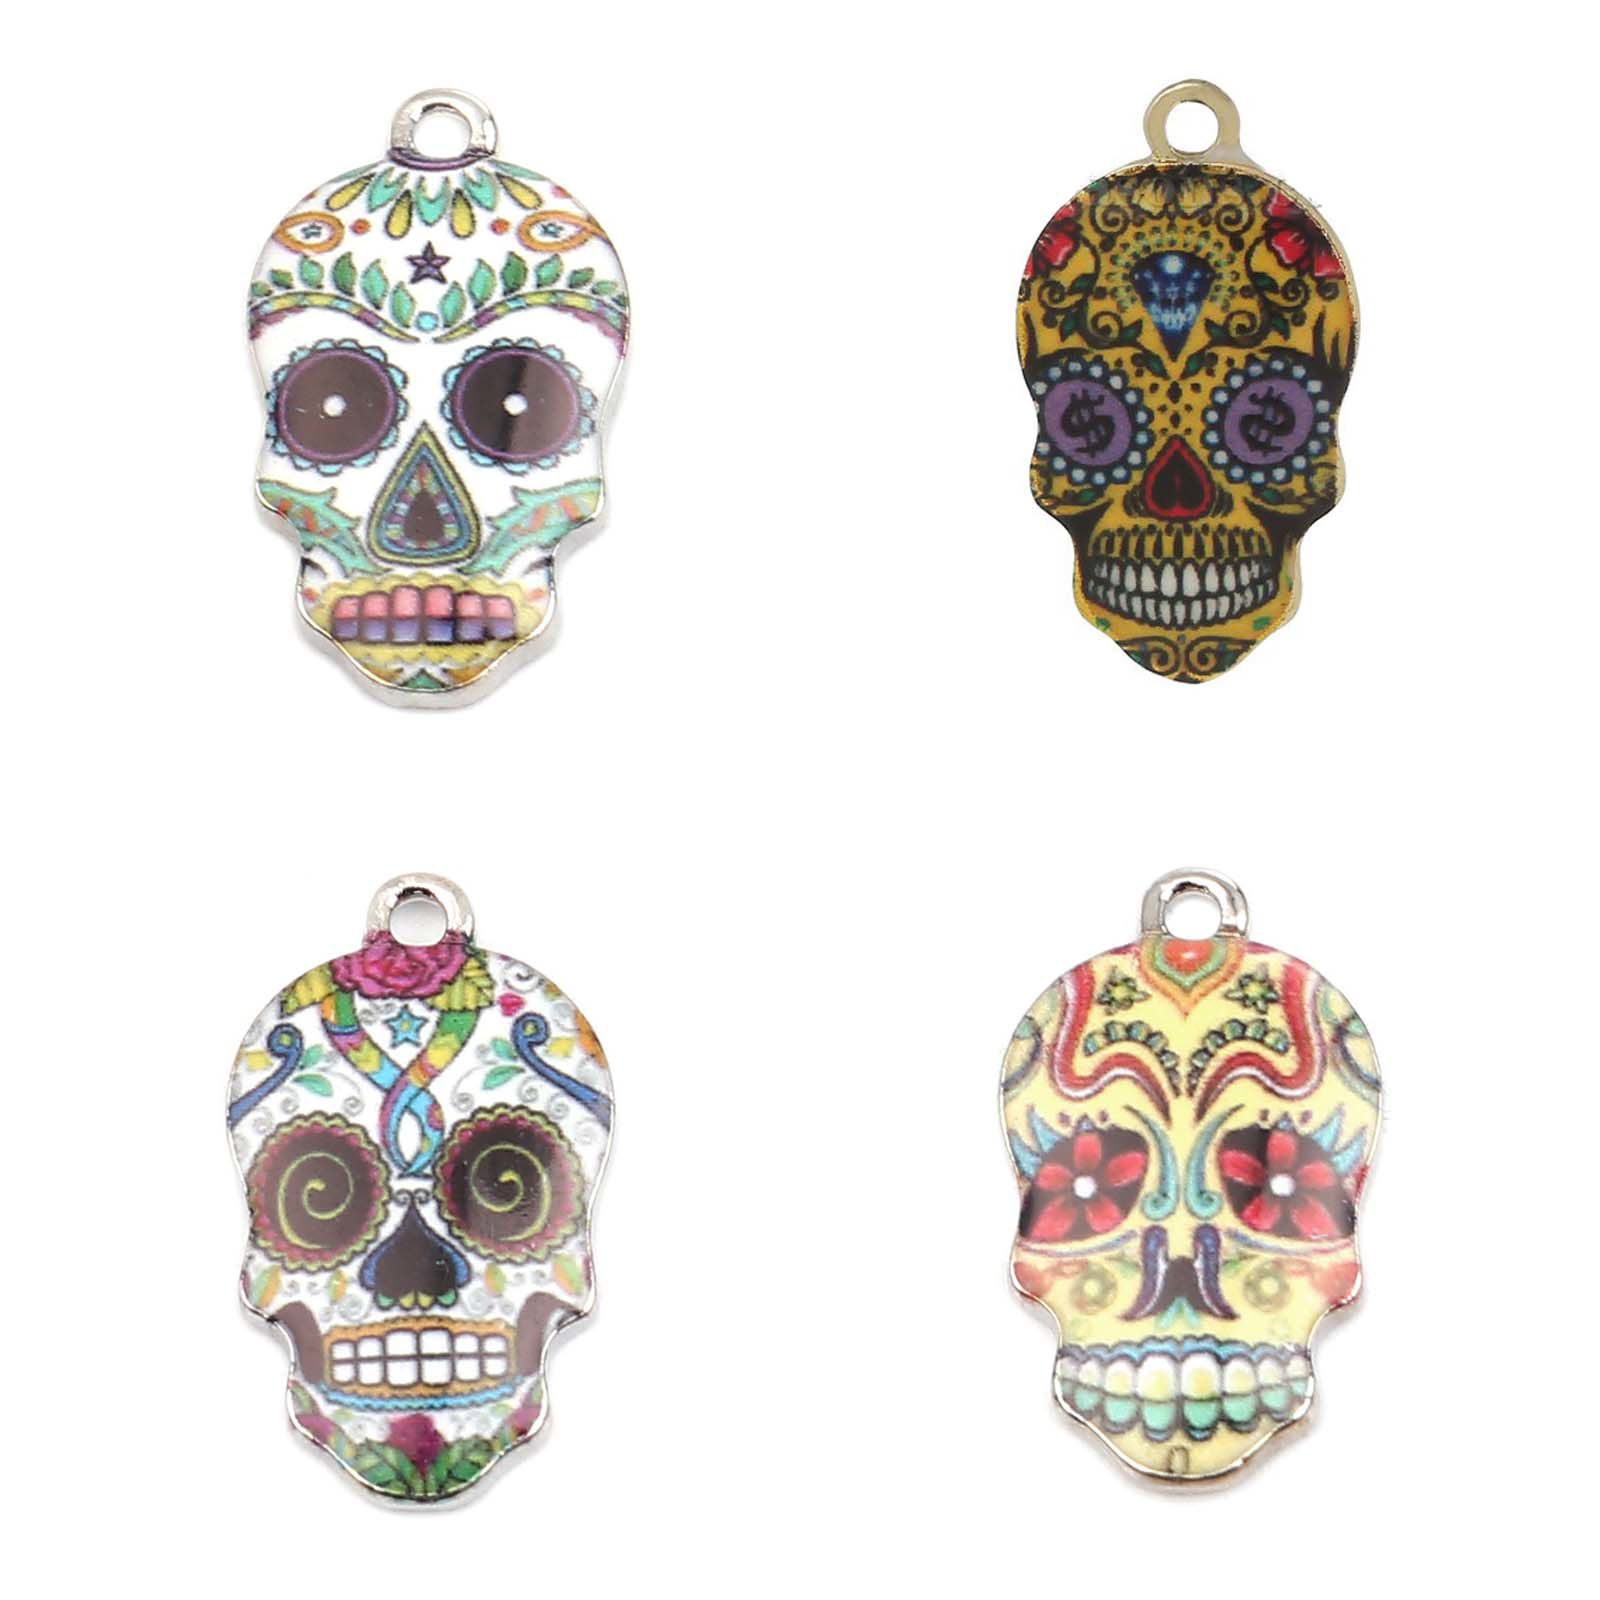 Picture of Zinc Based Alloy Day Of The Dead Charms Sugar Skull Gold Plated Heart Flower Pattern Multicolor Enamel 23mm( 7/8") x 13mm( 4/8"), 5 PCs